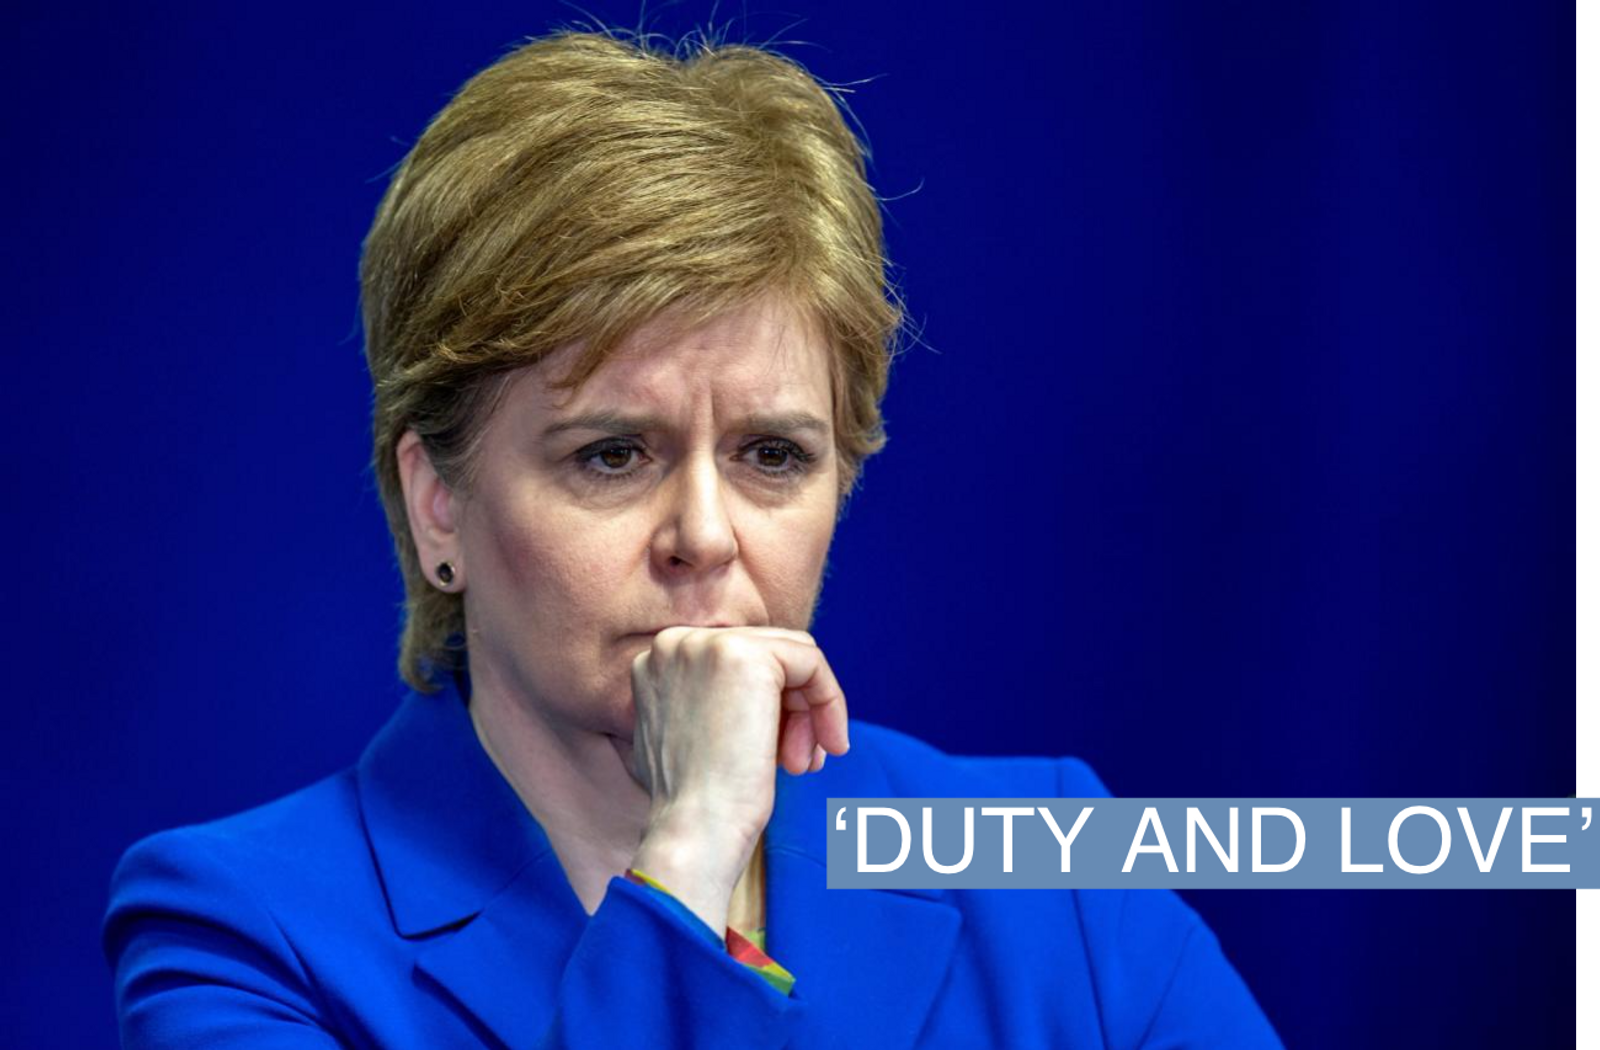 First Minister of Scotland Nicola Sturgeon reacts as she answers questions on Scottish Government issues, during a news conference at St Andrews House, in Edinburgh, Britain February 6, 2023. Jane Barlow/Pool via REUTERS/File Photo